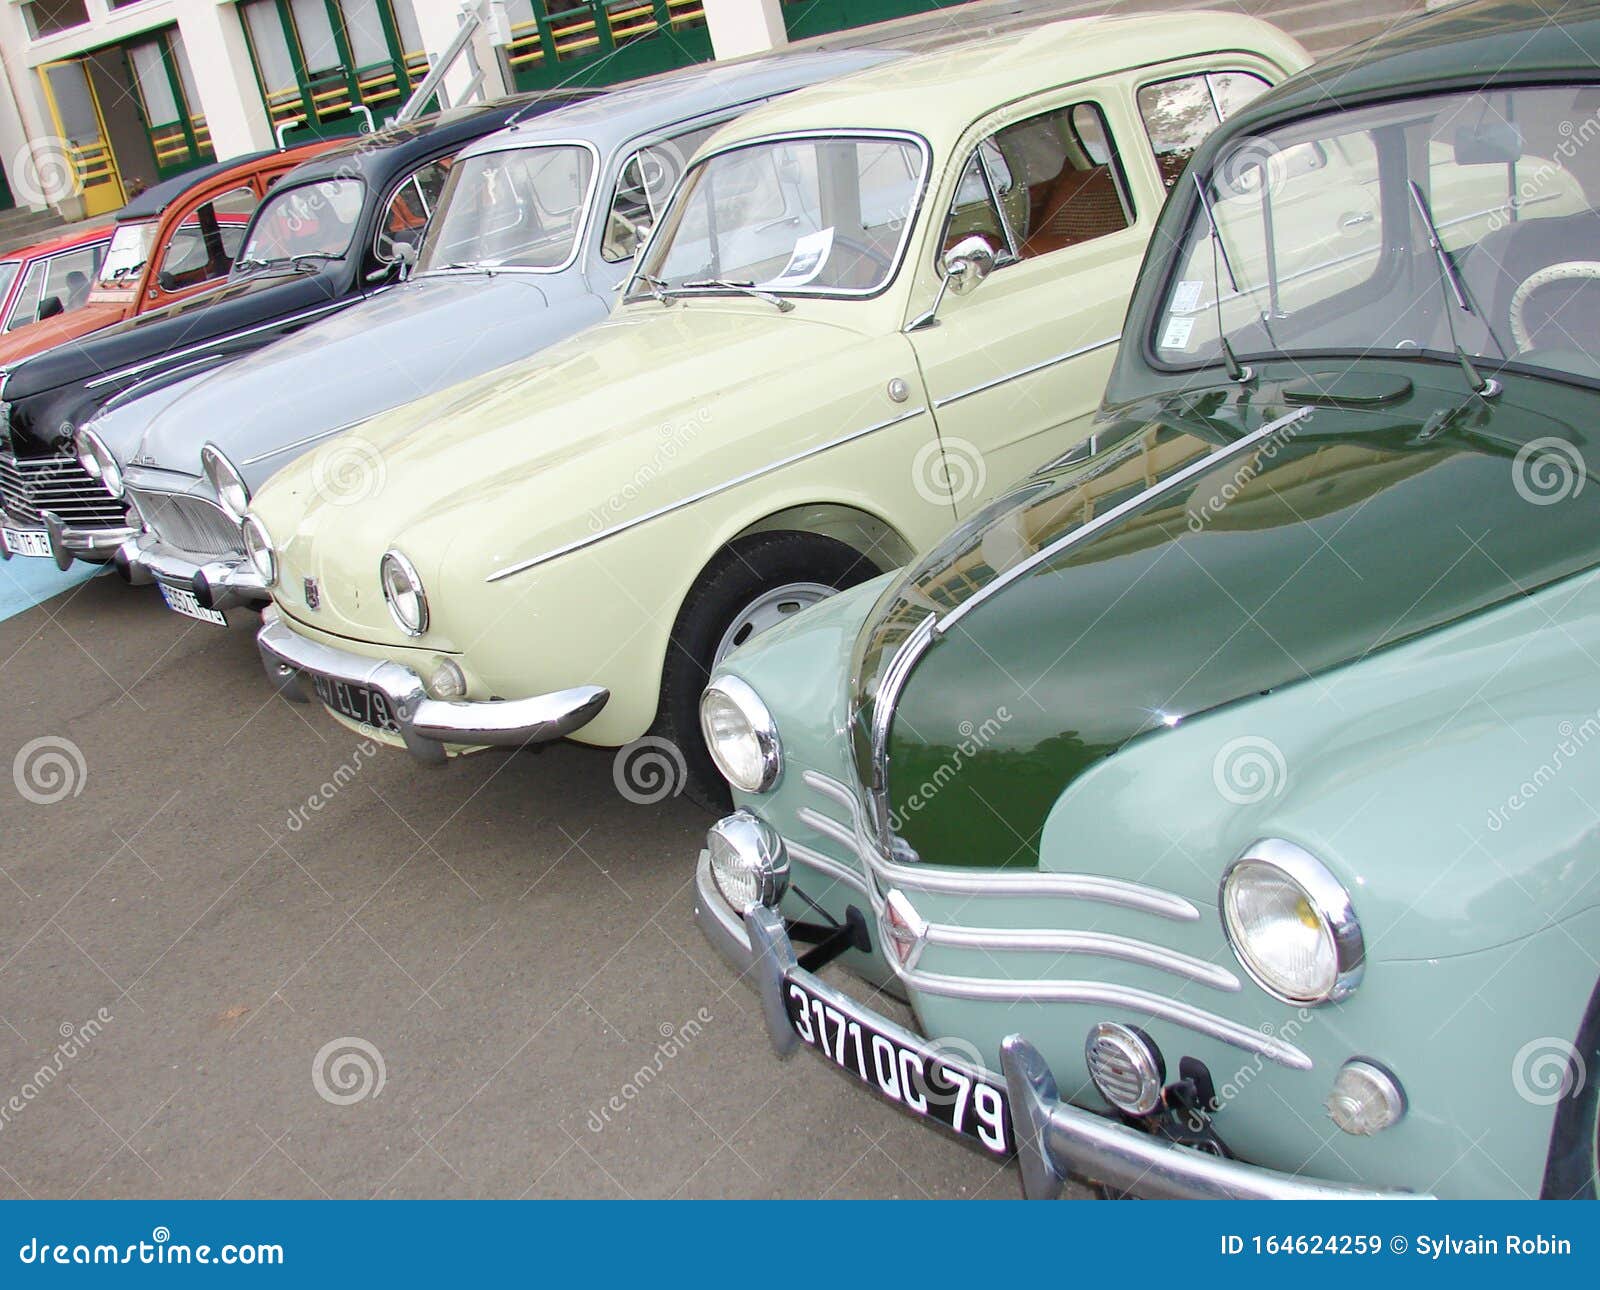 Bordeaux , Aquitaine / France - 11 19 2019 : Classic French Oldtimer Cars  Motor Car on Show Renault Peugeot Citroen Simca Editorial Stock Image -  Image of oldfashioned, ondine: 164624259